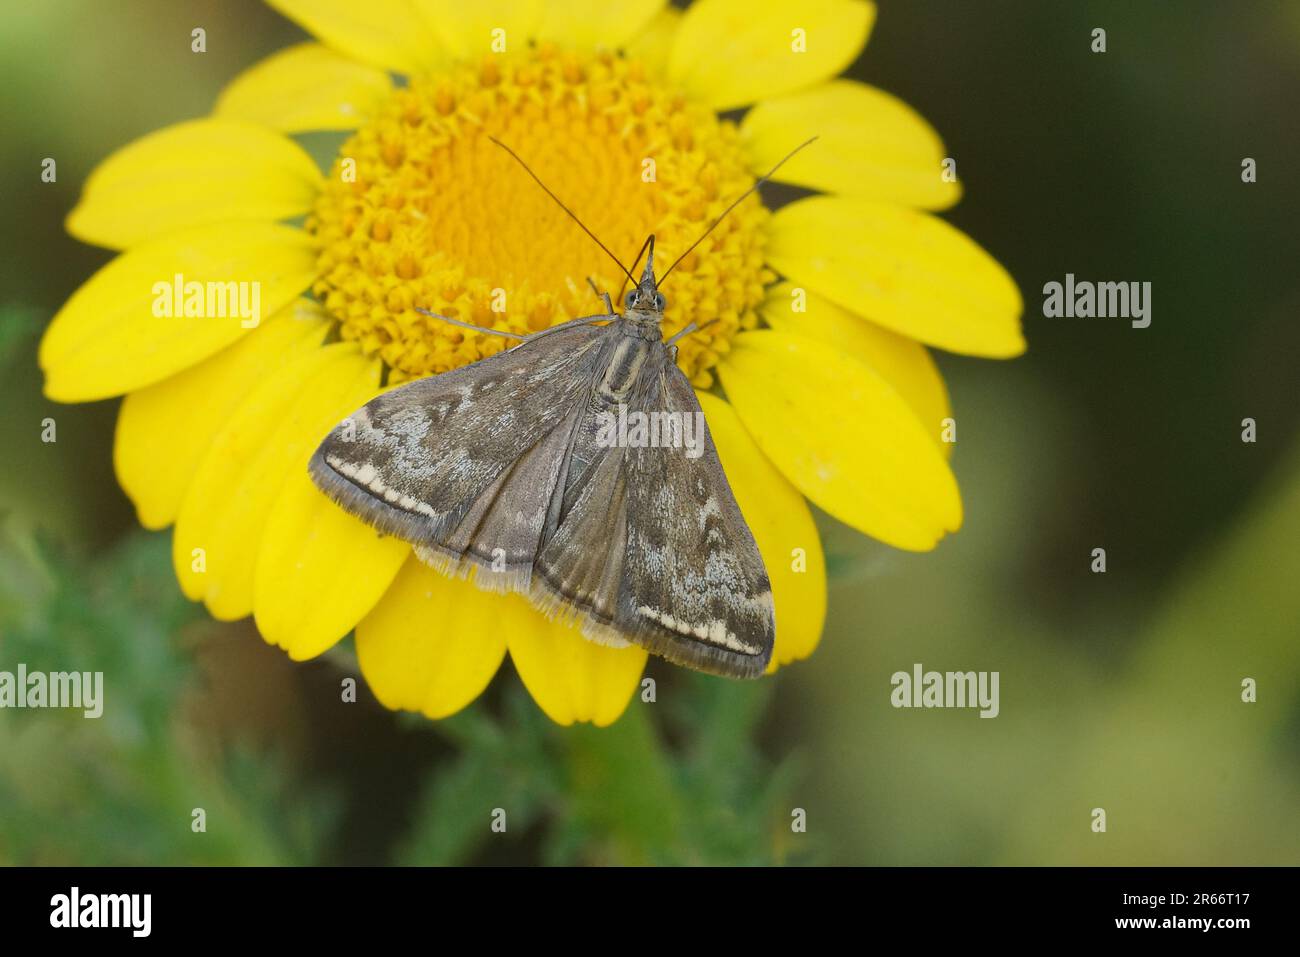 Natural closeup on the diurnal Beet webworm crambid moth, Loxostege sticticalis sitting on a yellow flower Stock Photo